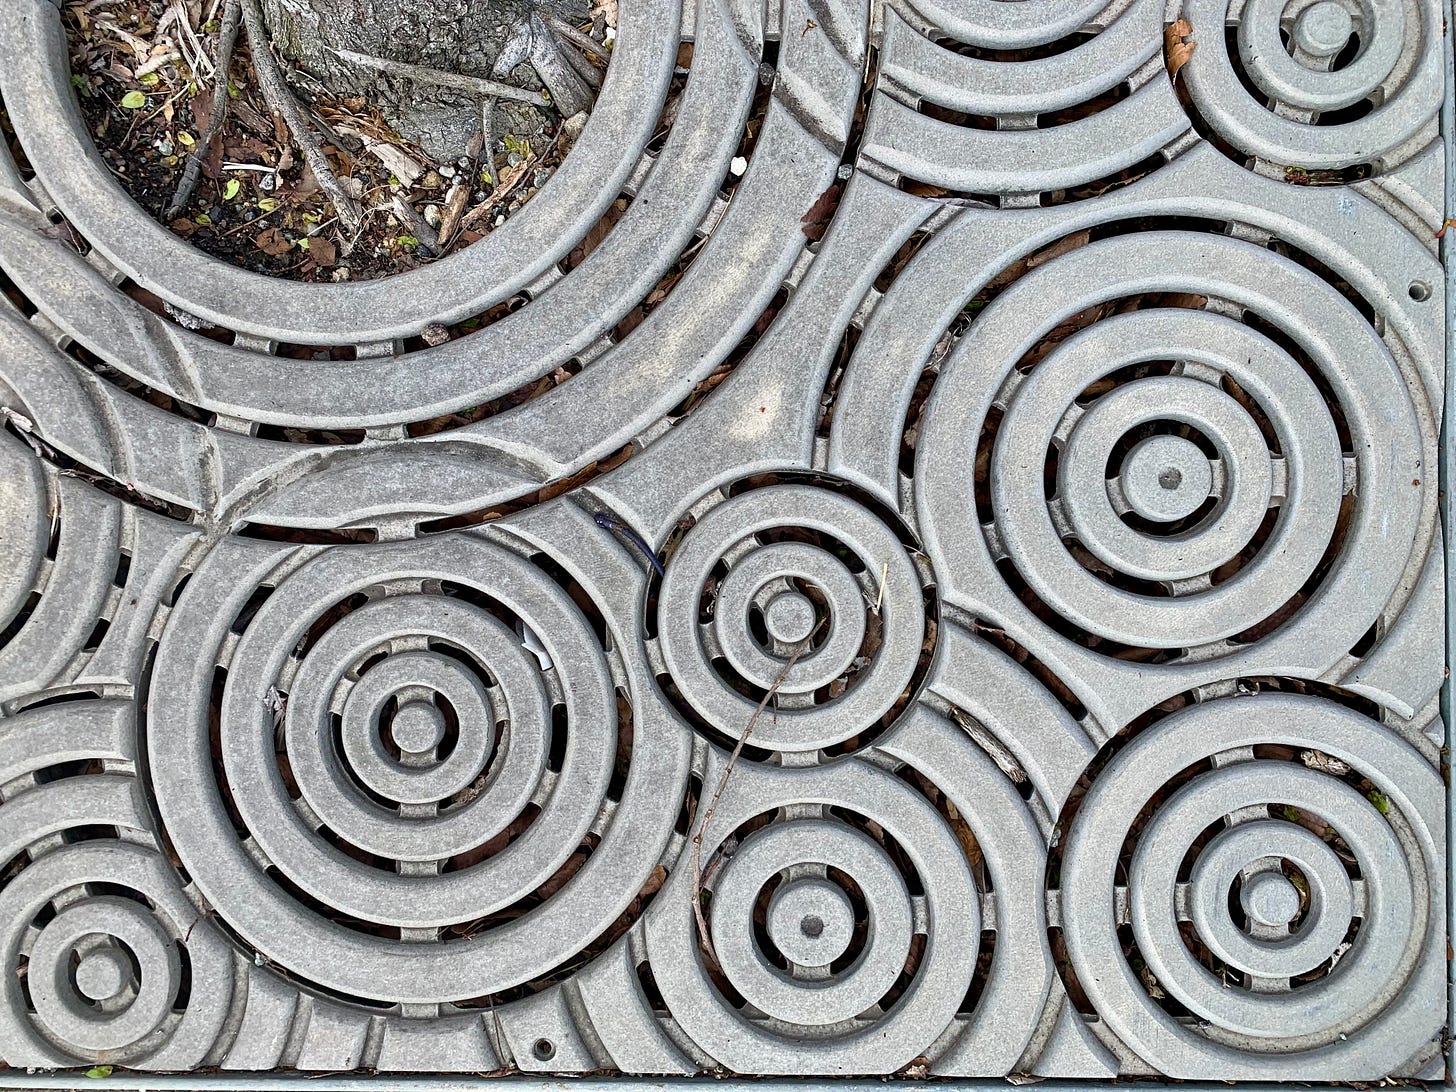 a curious pattern in a metal grate that reminded me of boombox speakers!